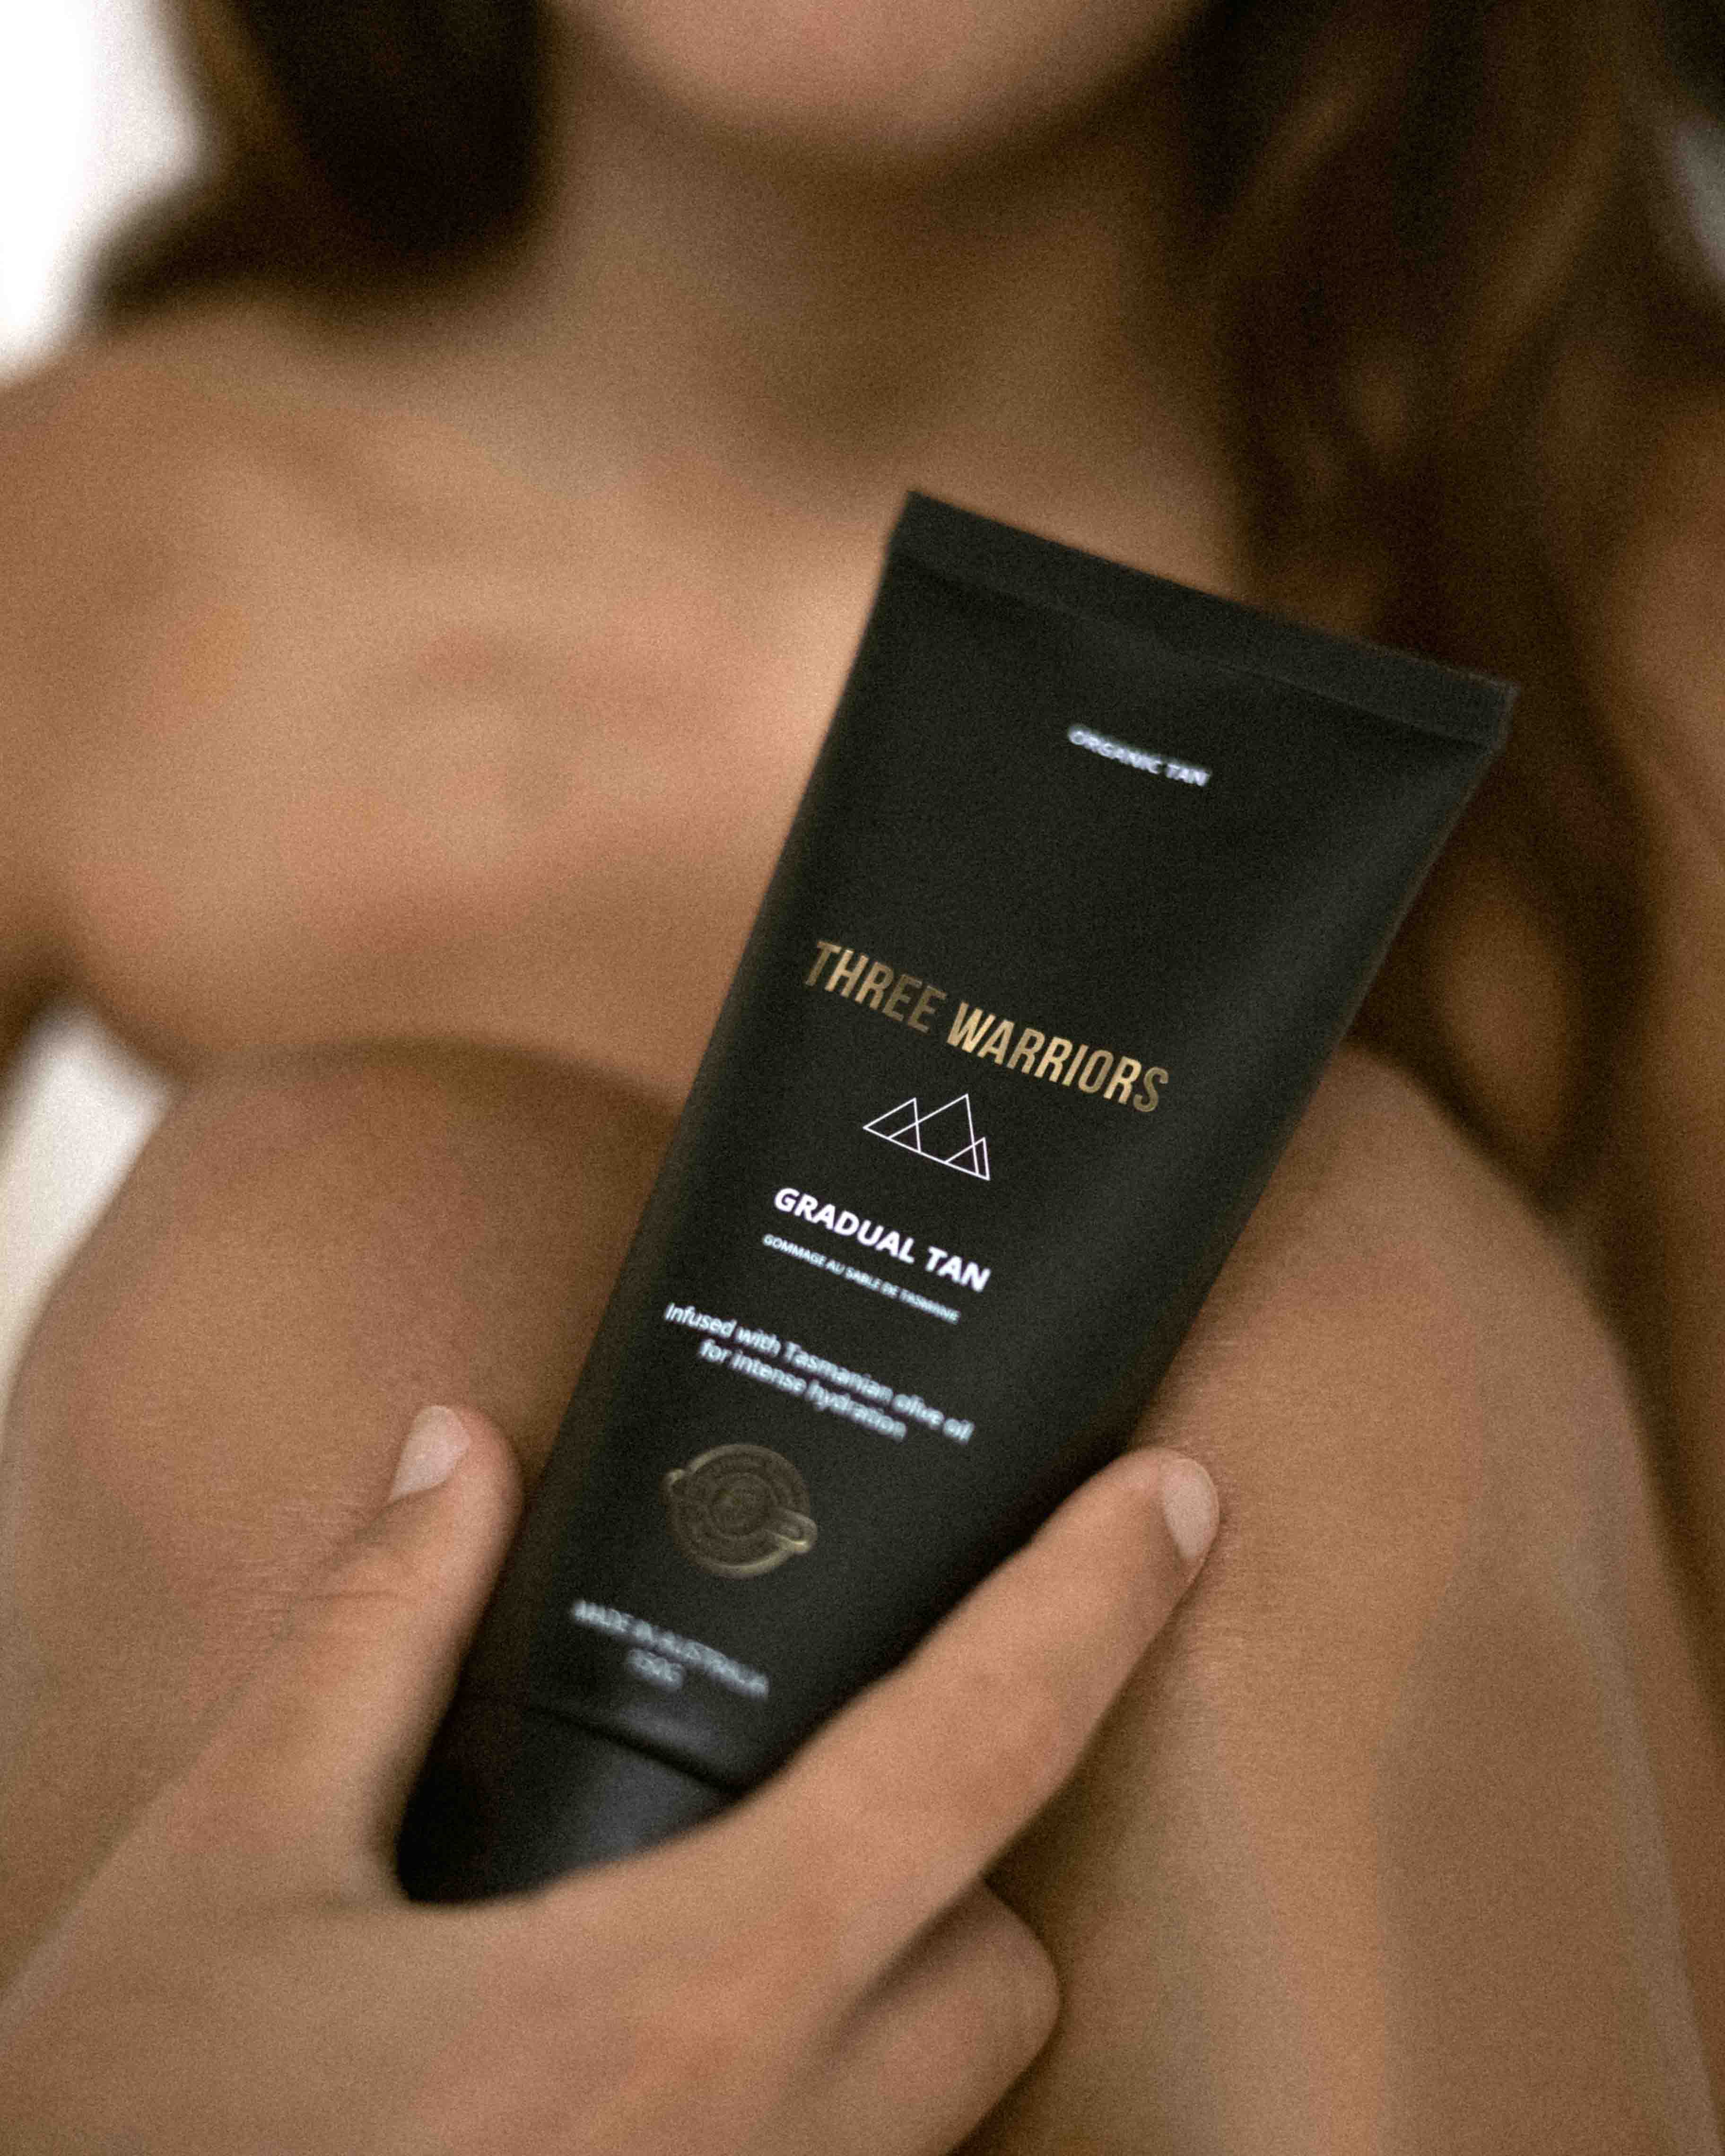 How Long Does It Take for Gradual Tan to Develop?